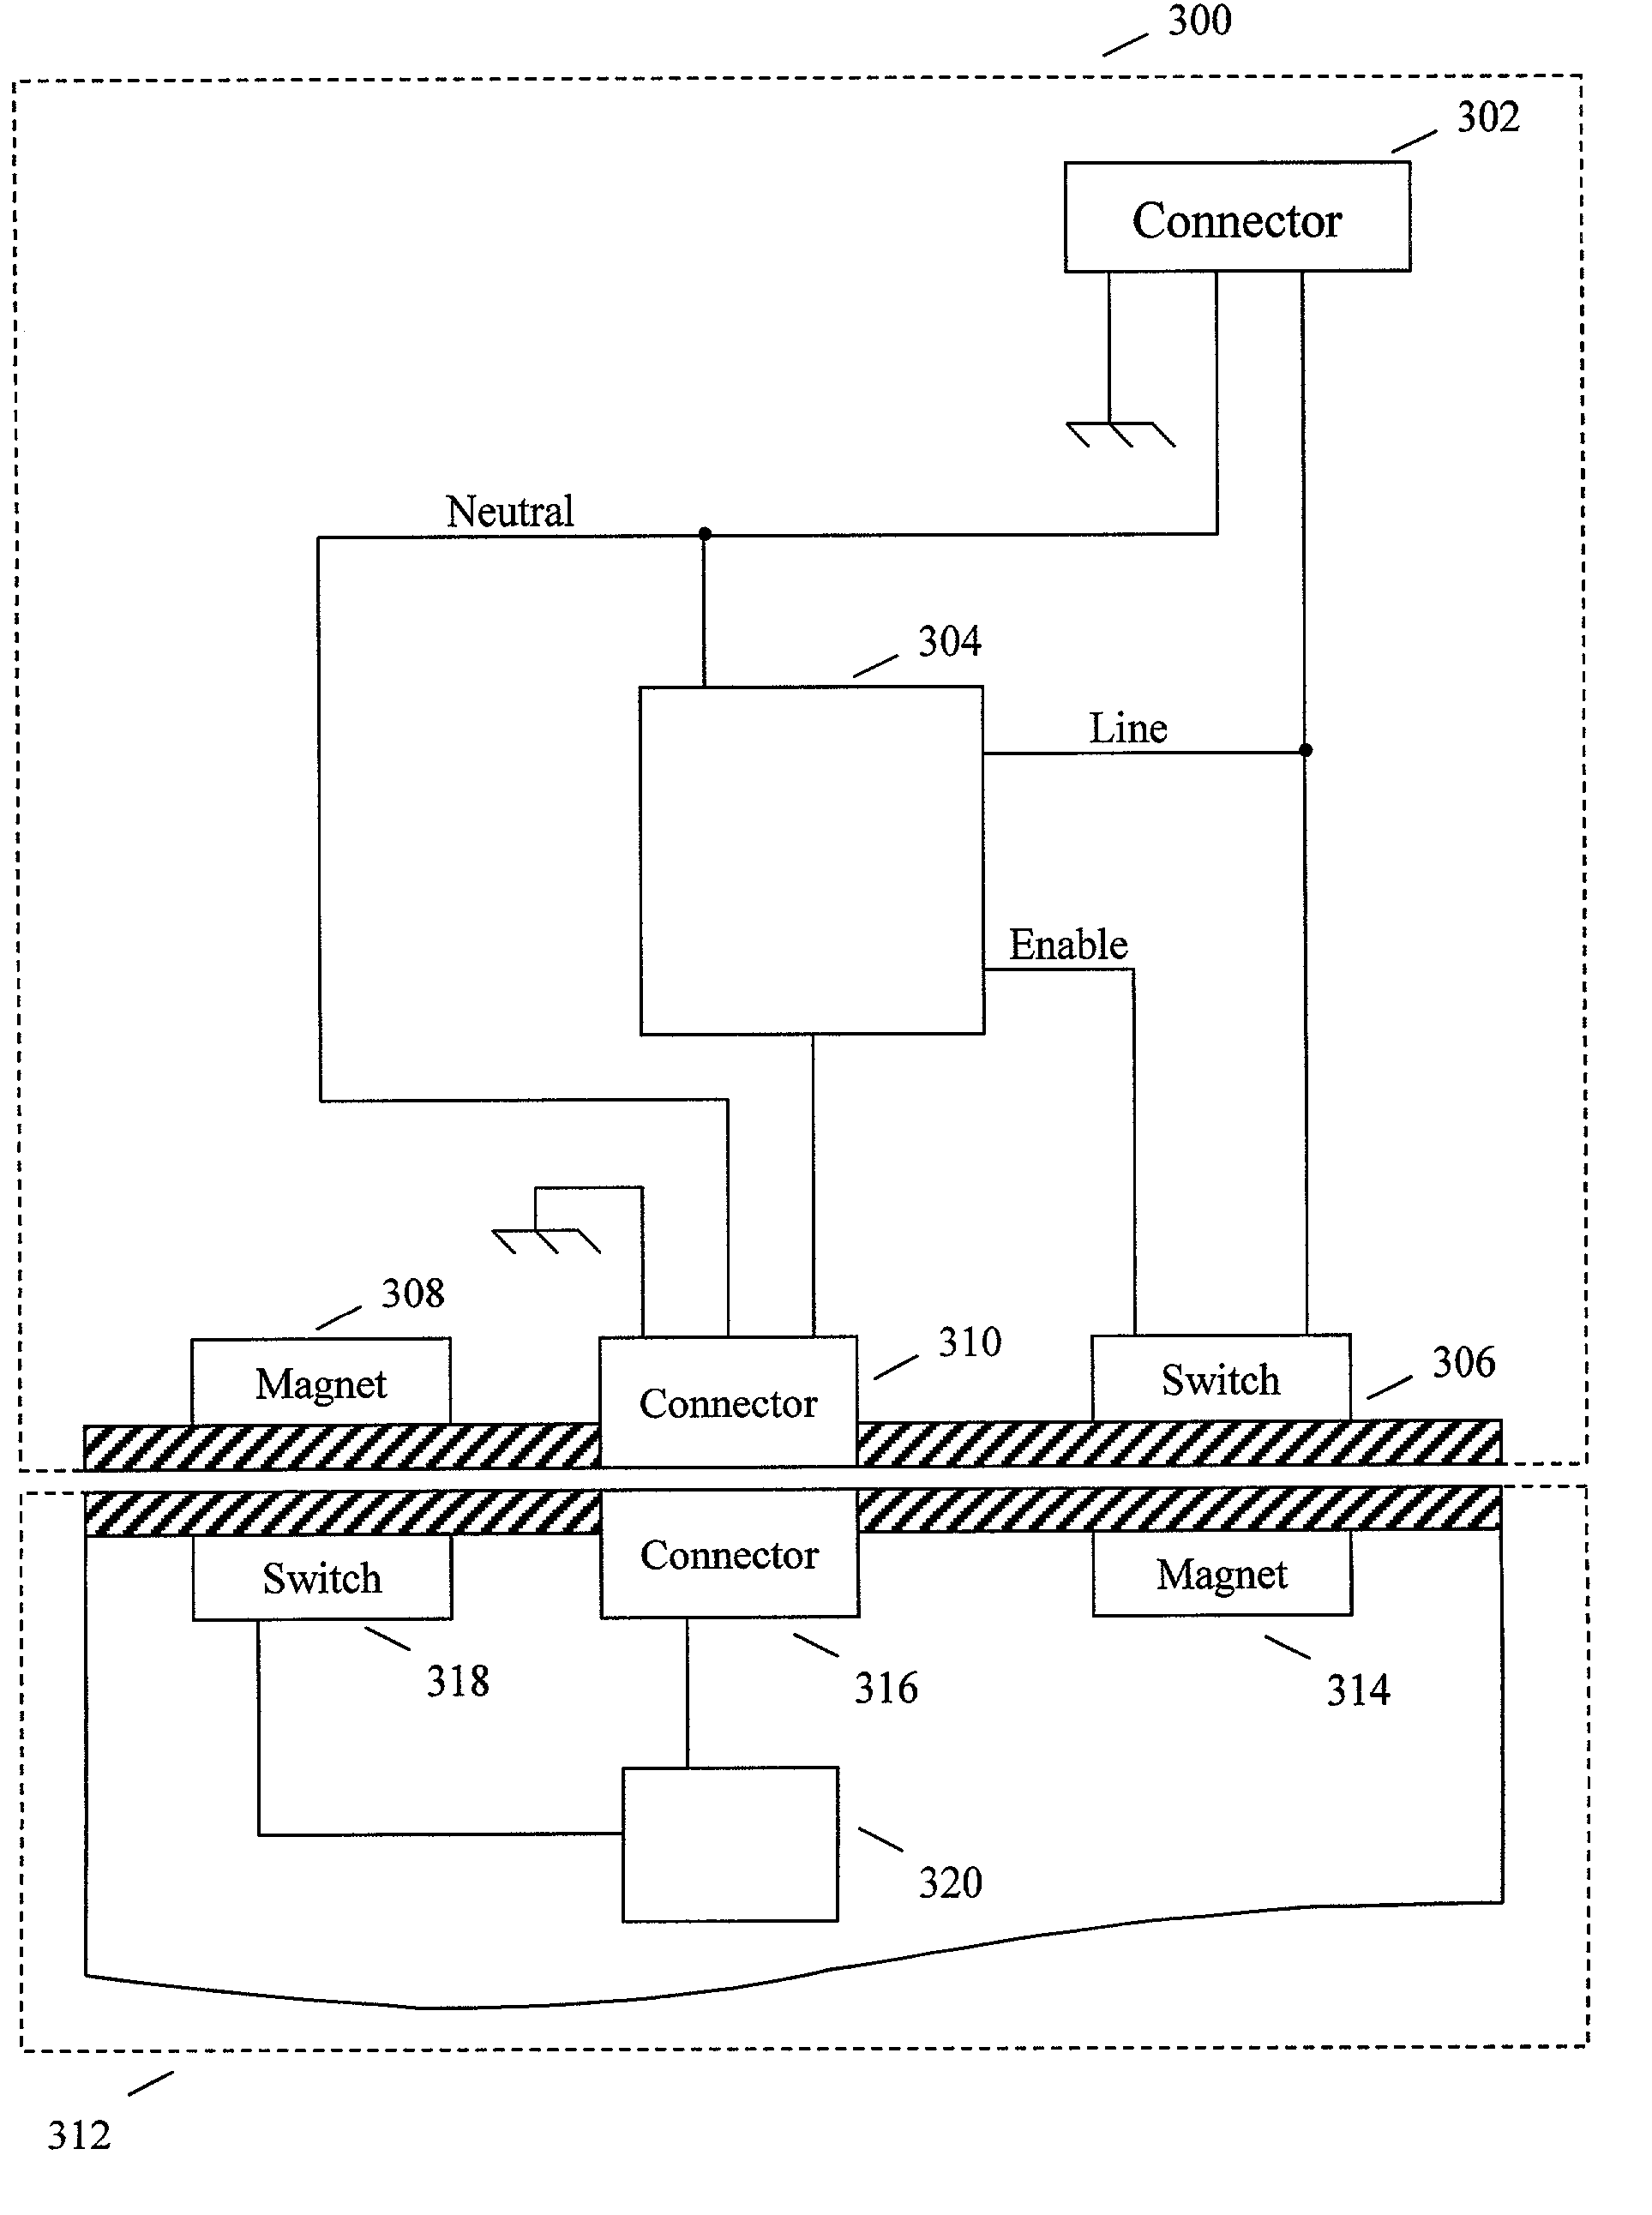 Magnetic proximity interface control